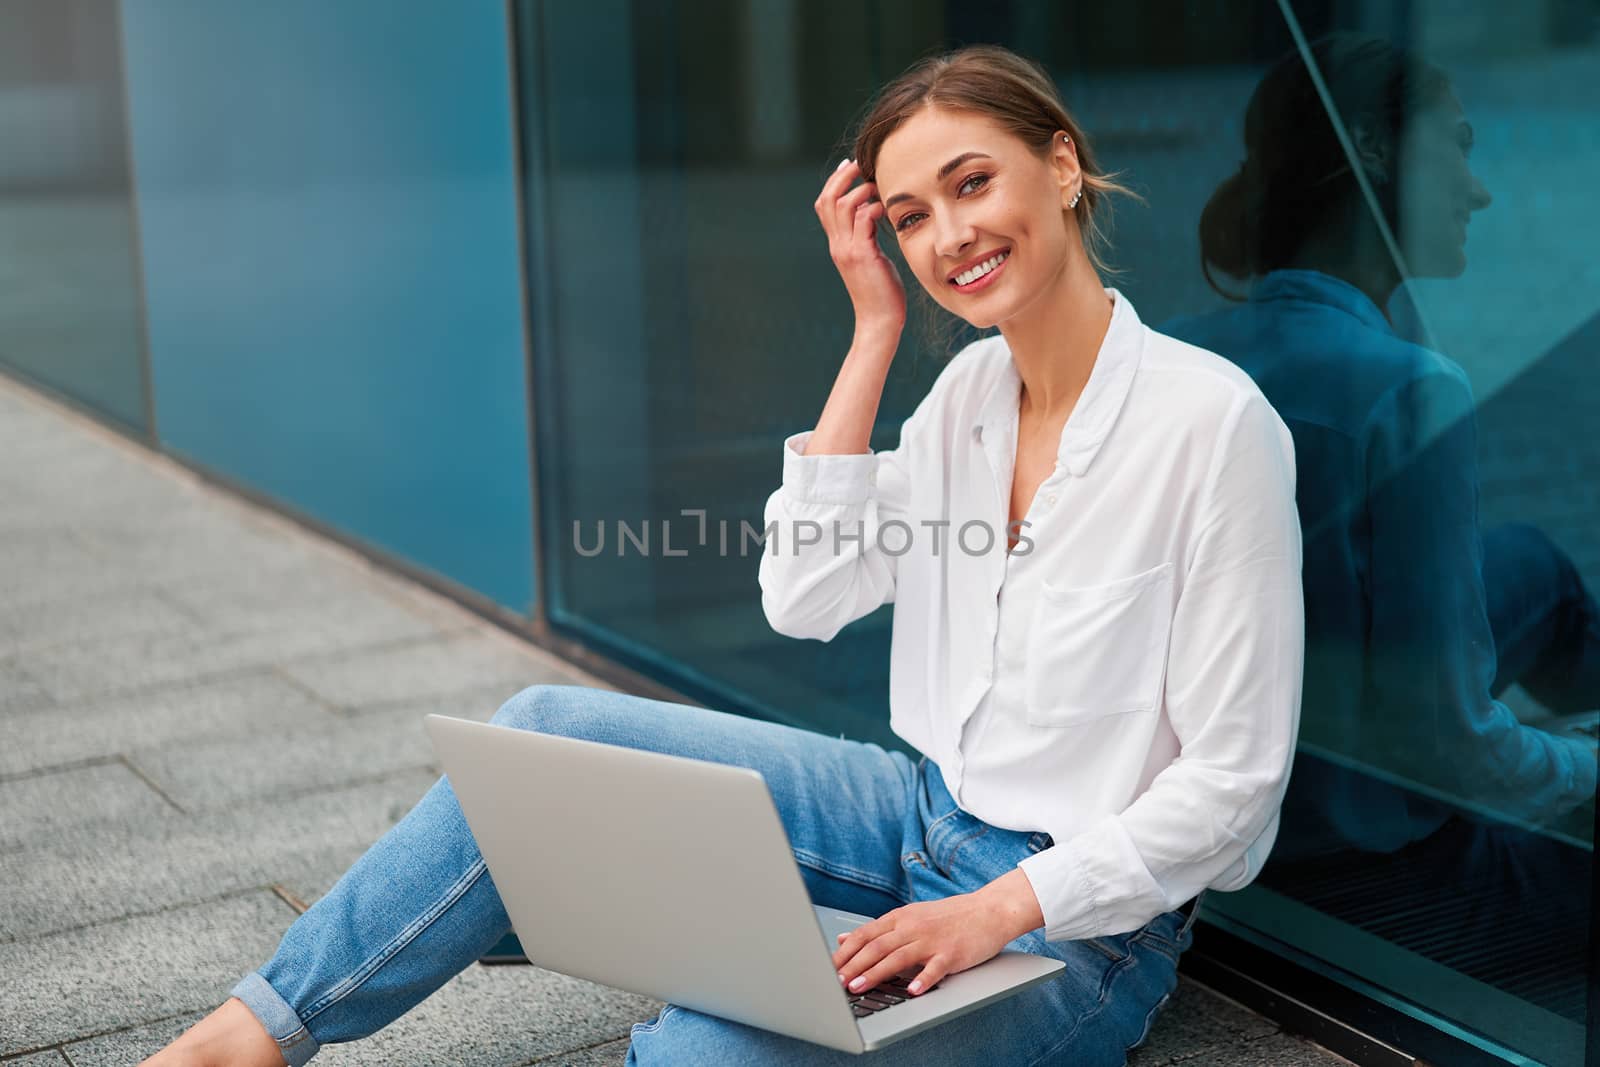 Businesswoman laptop successful woman business person outdoor corporate building exterior Pensive elegance caucasian professional business woman middle age ecommerce deal Online banking Sitting ground